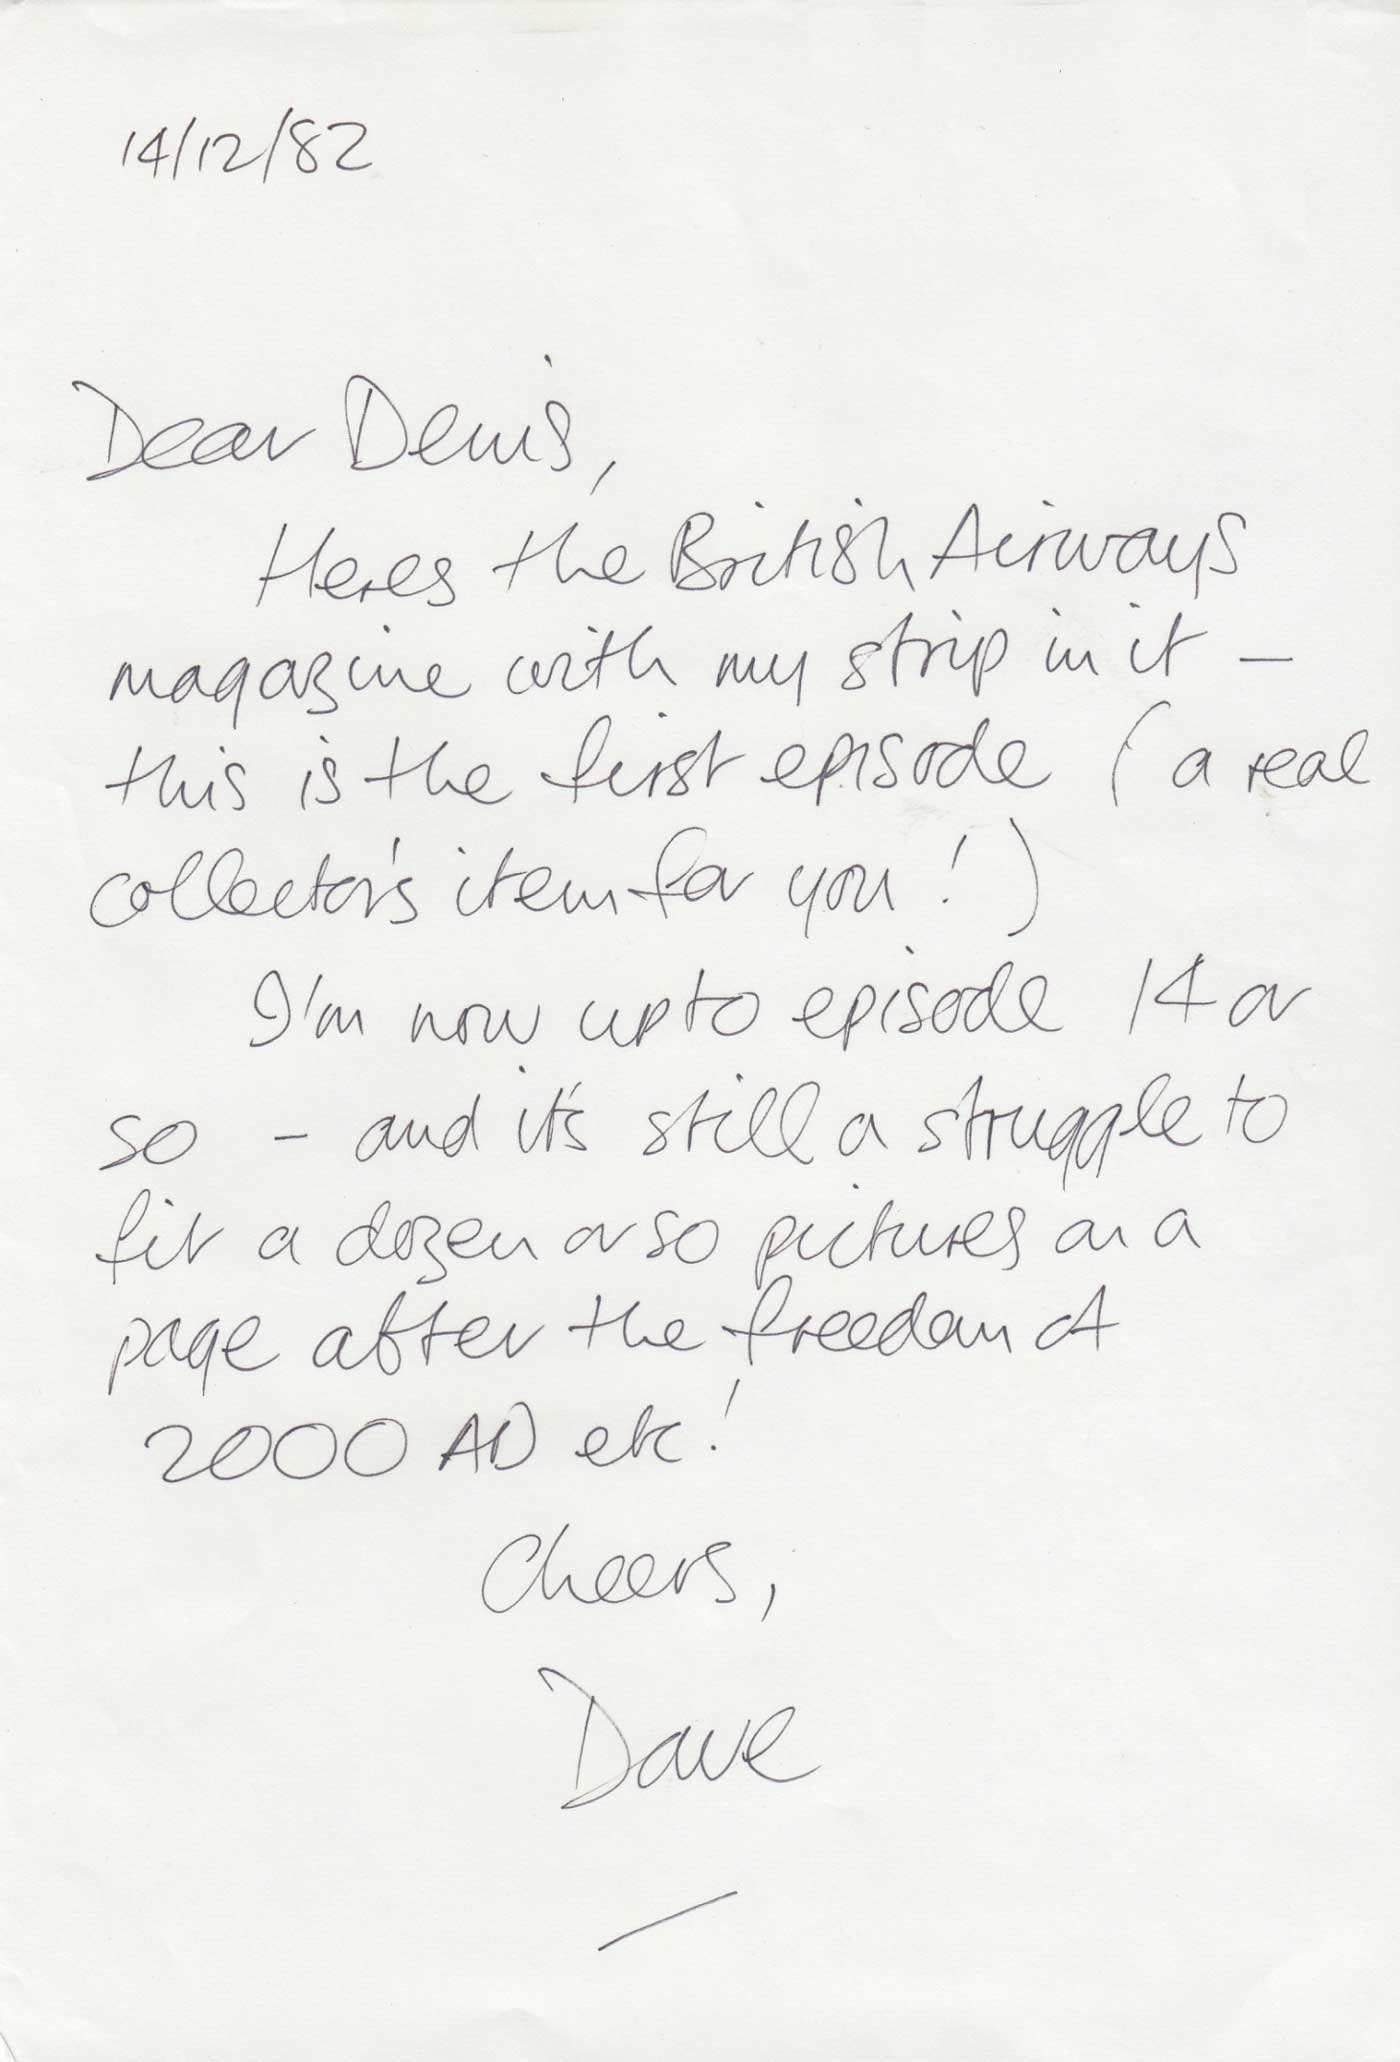 A covering note that accompanied a copy of the magazine from Dave written in 1982 about his work on "Jet Jason"